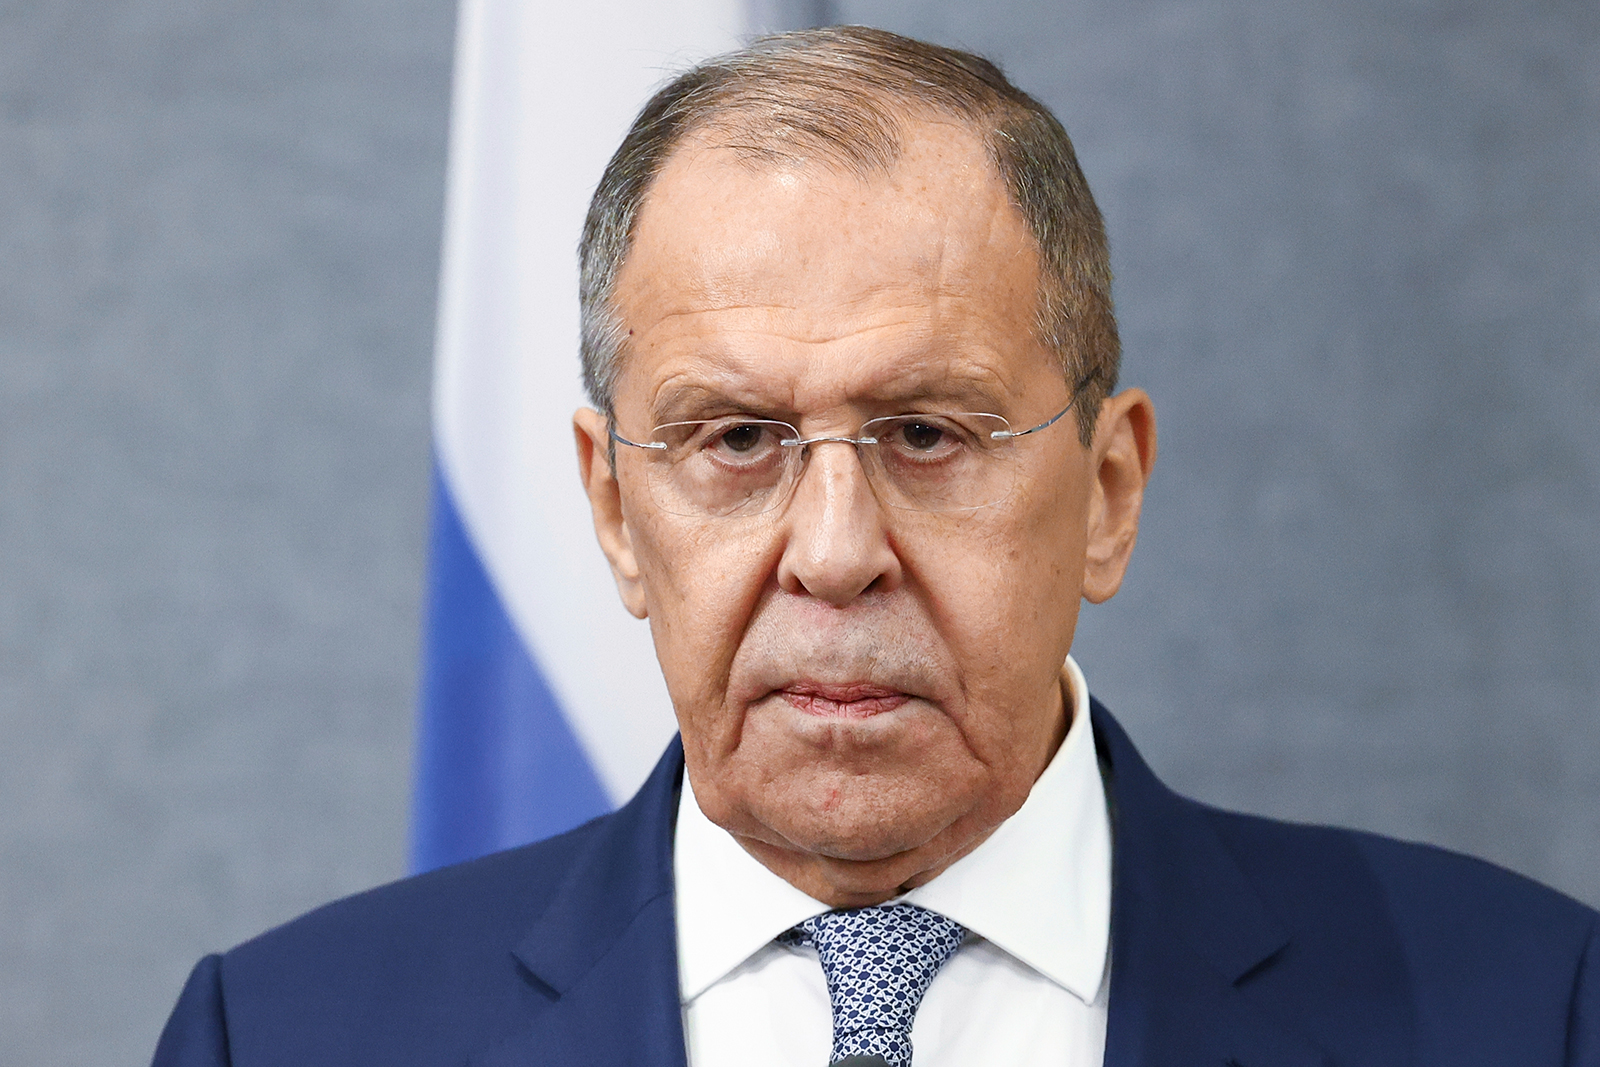 Russian Foreign Minister Sergey Lavrov speaks during a news conference in Bujumbura, Burundi, on Tuesday, May 30.